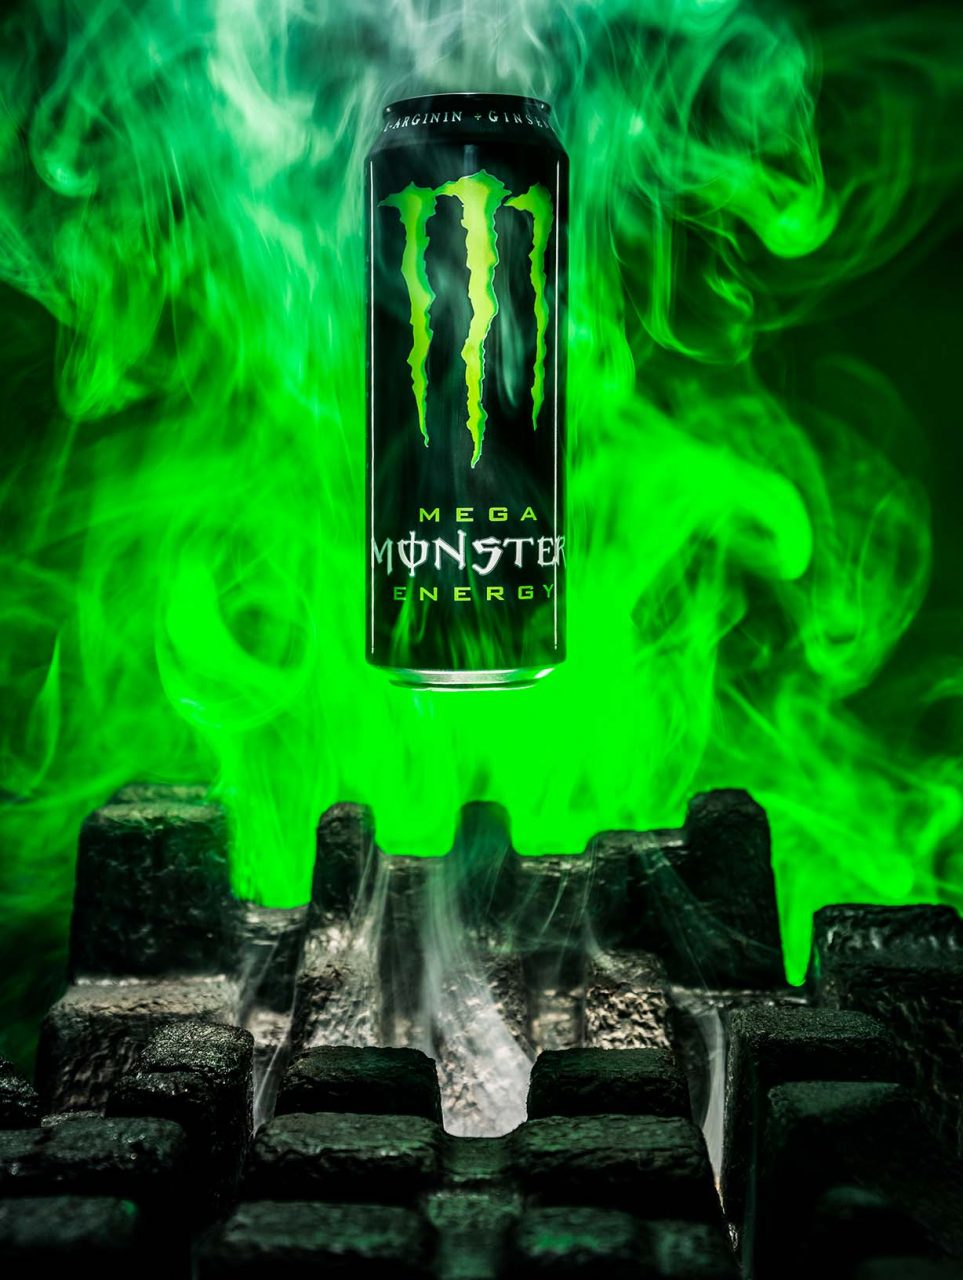 Photography tutorial can of monster drink